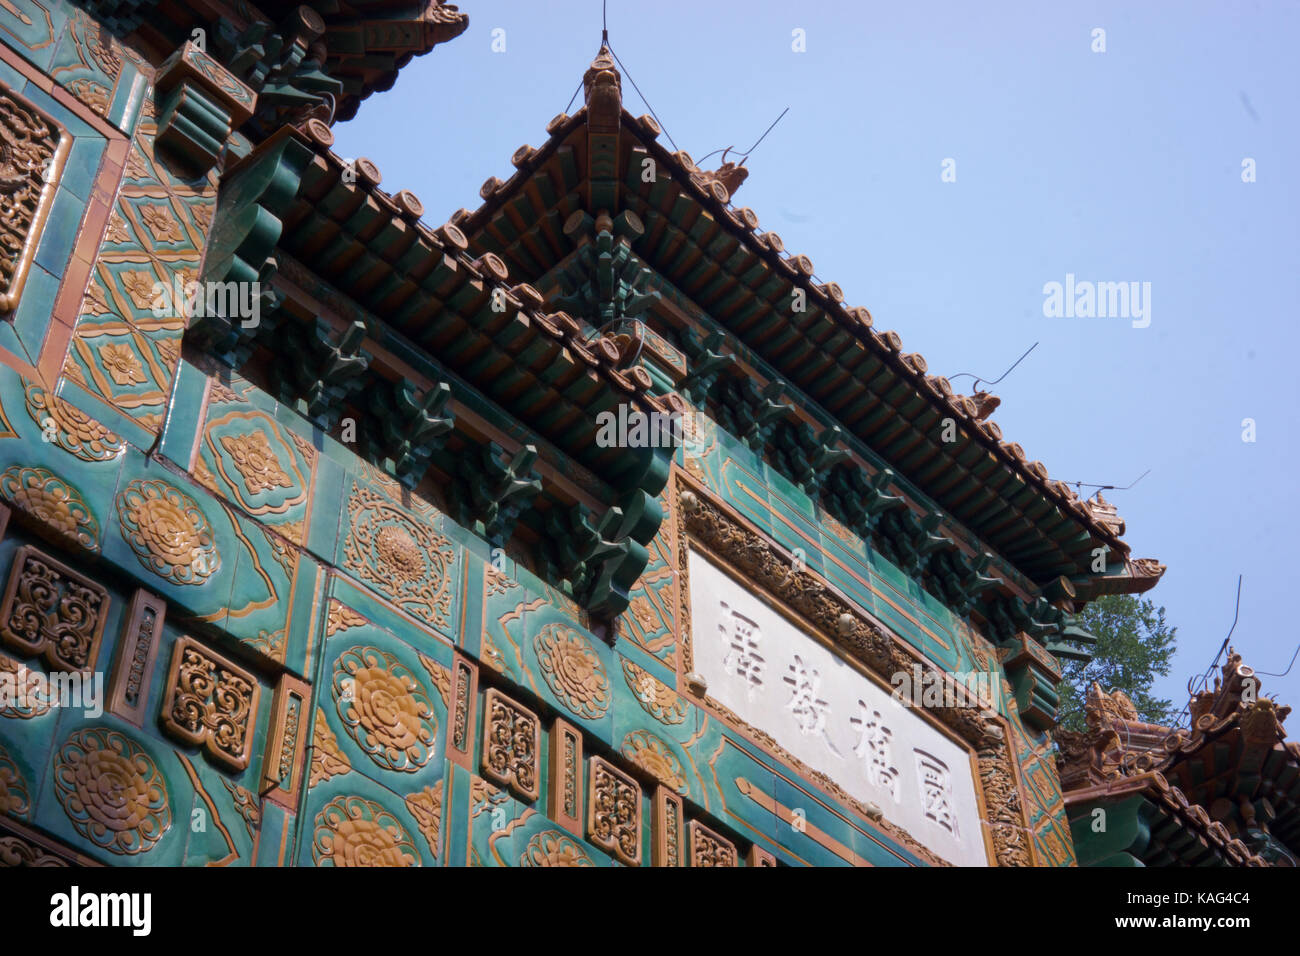 The eaves and wall sculpture at Guozijian in Beijing Stock Photo